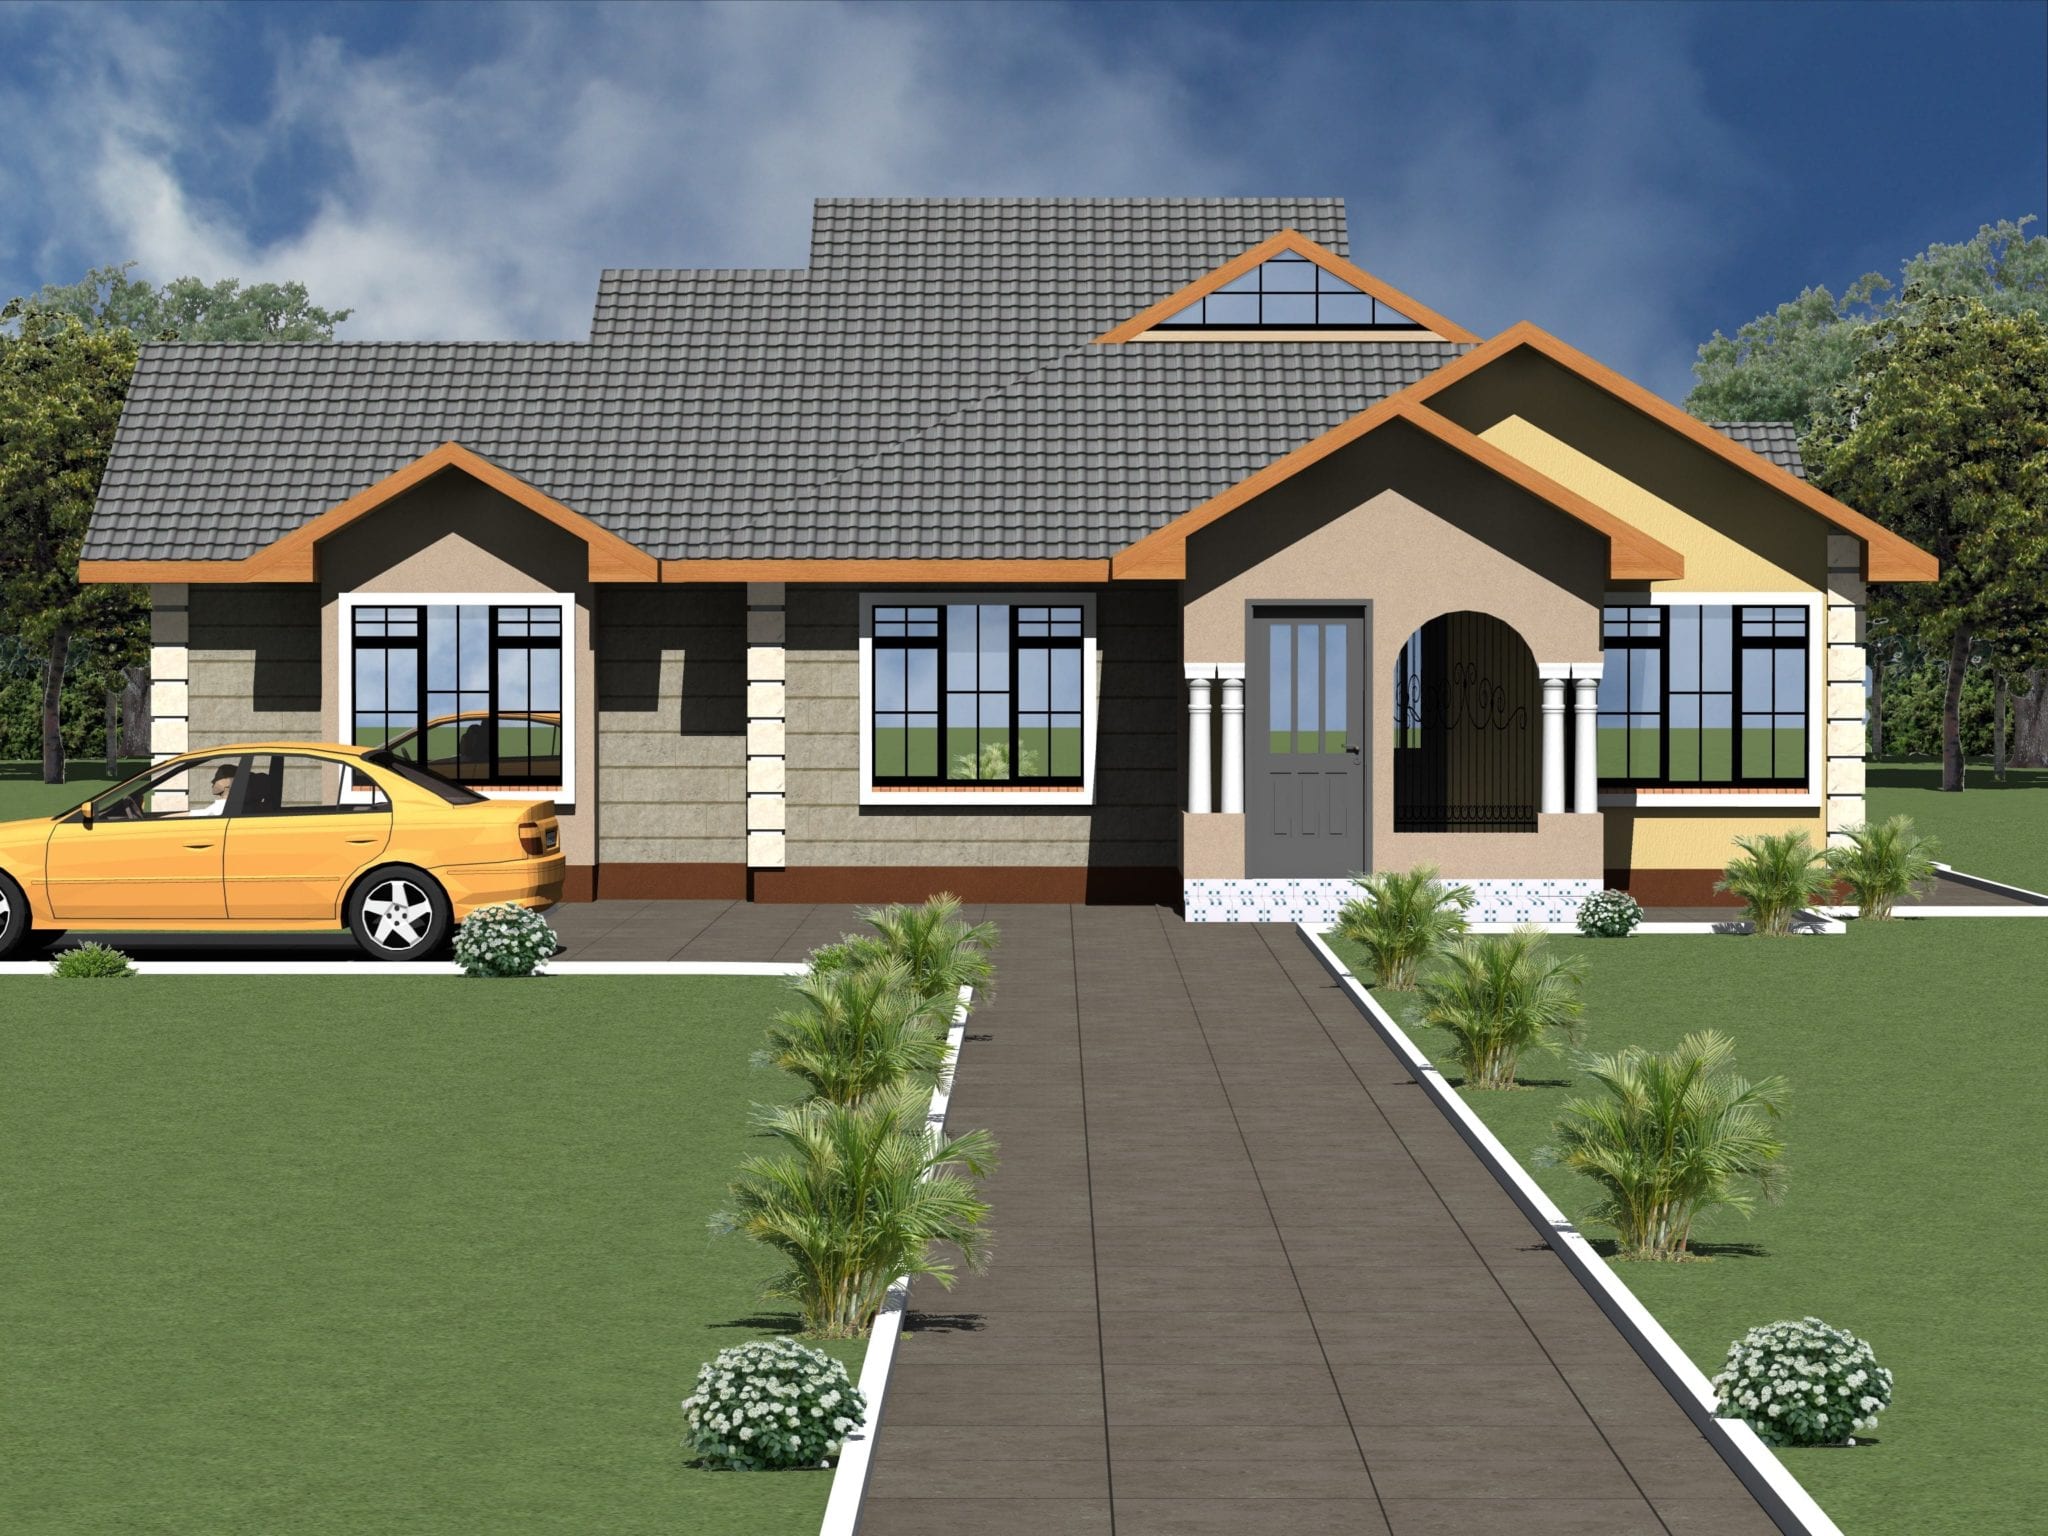  Modern  3  Bedroom  Bungalow  House  Plan  Design  HPD Consult